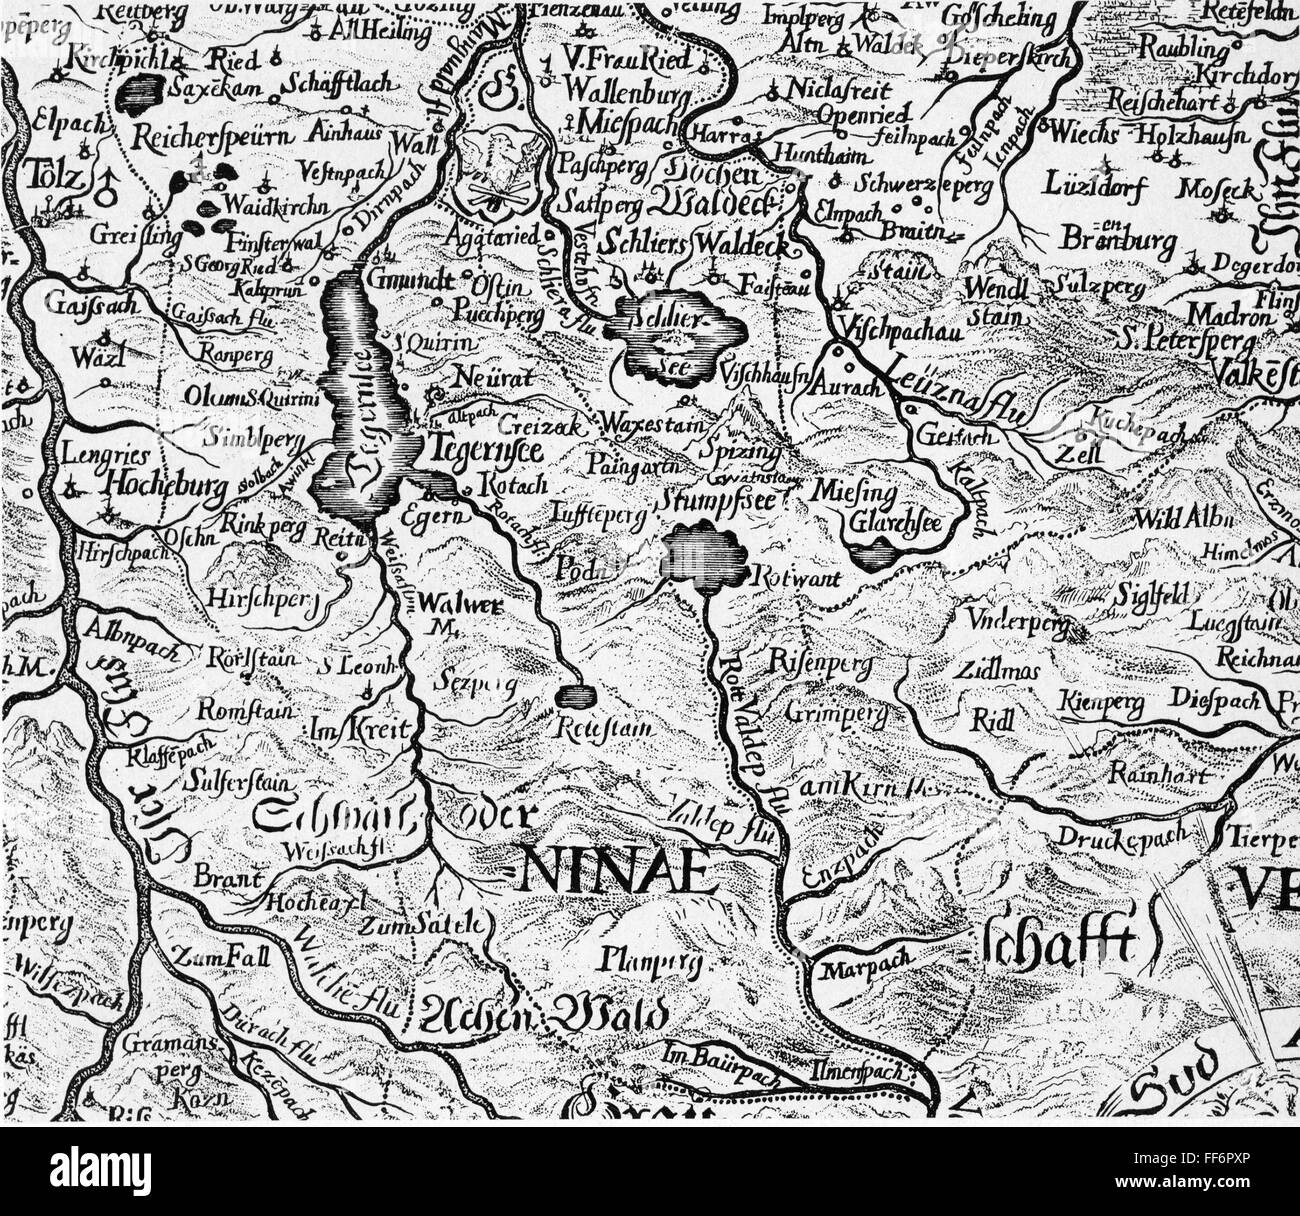 cartography, map, Germany, Bavarian Oberland, copper engraving, 17th century, electorate Bavaria, Upper Bavaria, river, rivers, Isar, lakes, lake, Tegernsee, Schliersee, stretch of waters, Alps, prealpine lands, alpine upland, Holy Roman Empire, Central Europe, cartography, map printing, map, maps, historic, historical, Artist's Copyright has not to be cleared Stock Photo